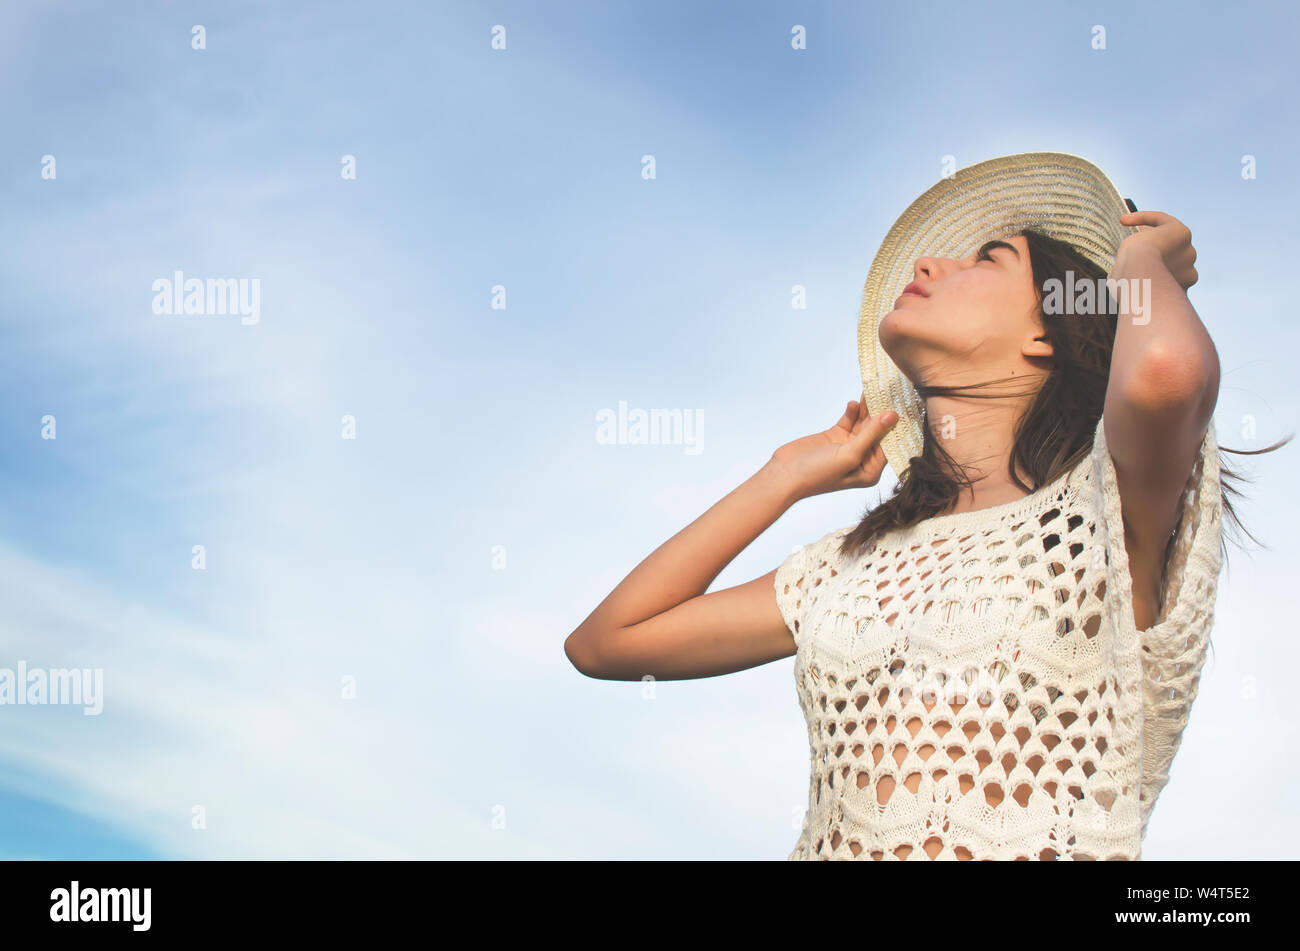 Teenager standing on beach holding her hat, Argentina Stock Photo